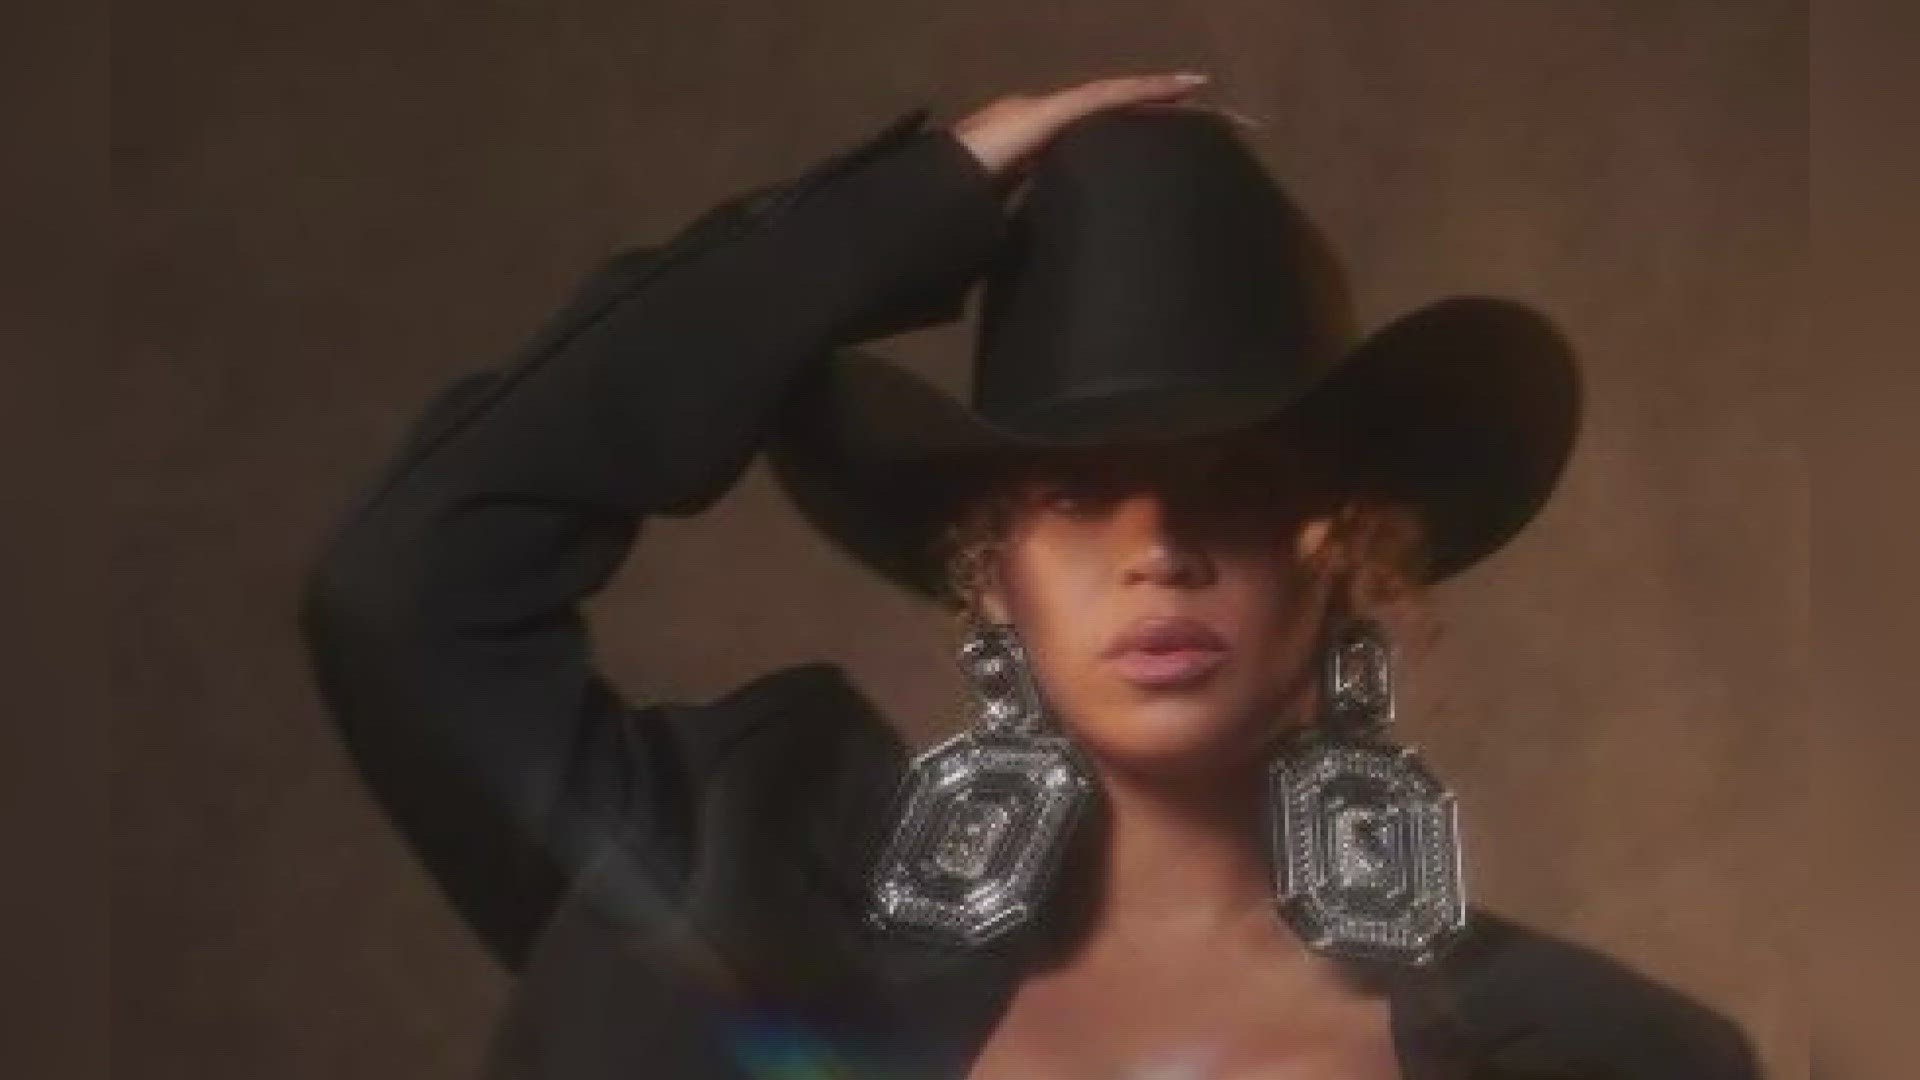 Two new tracks from the album - “Texas Hold ’Em” and “16 Carriages" - made Beyoncé the first Black woman to top Billboard's country music chart.